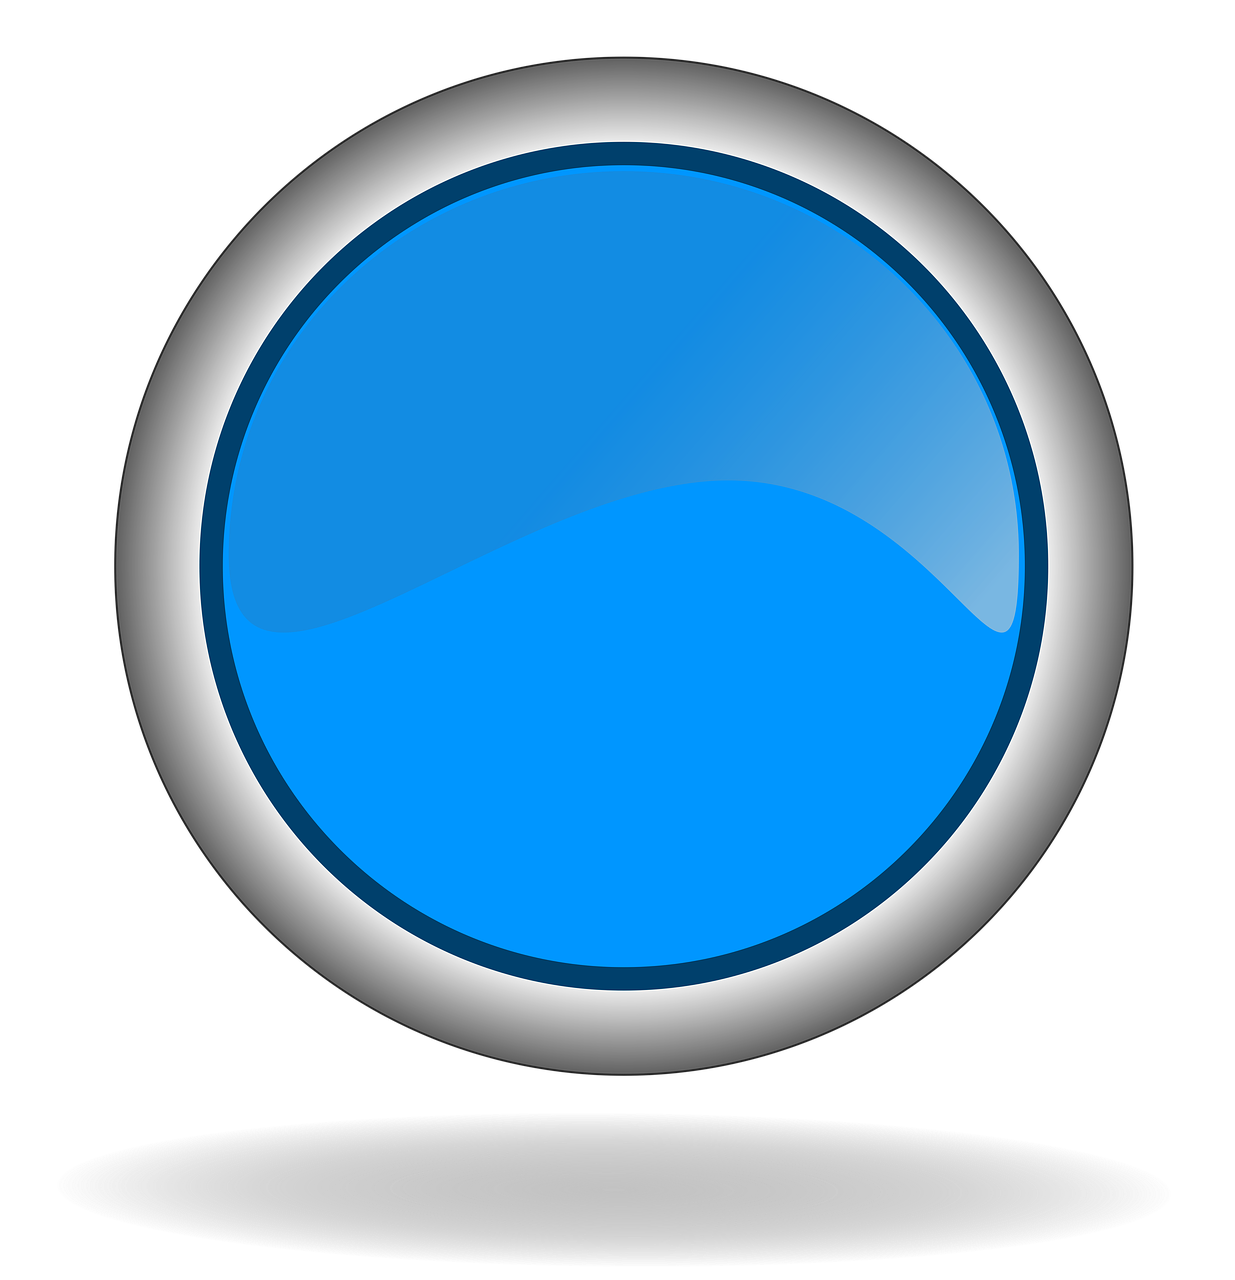 Blue button,button,web,blue,internet - free image from